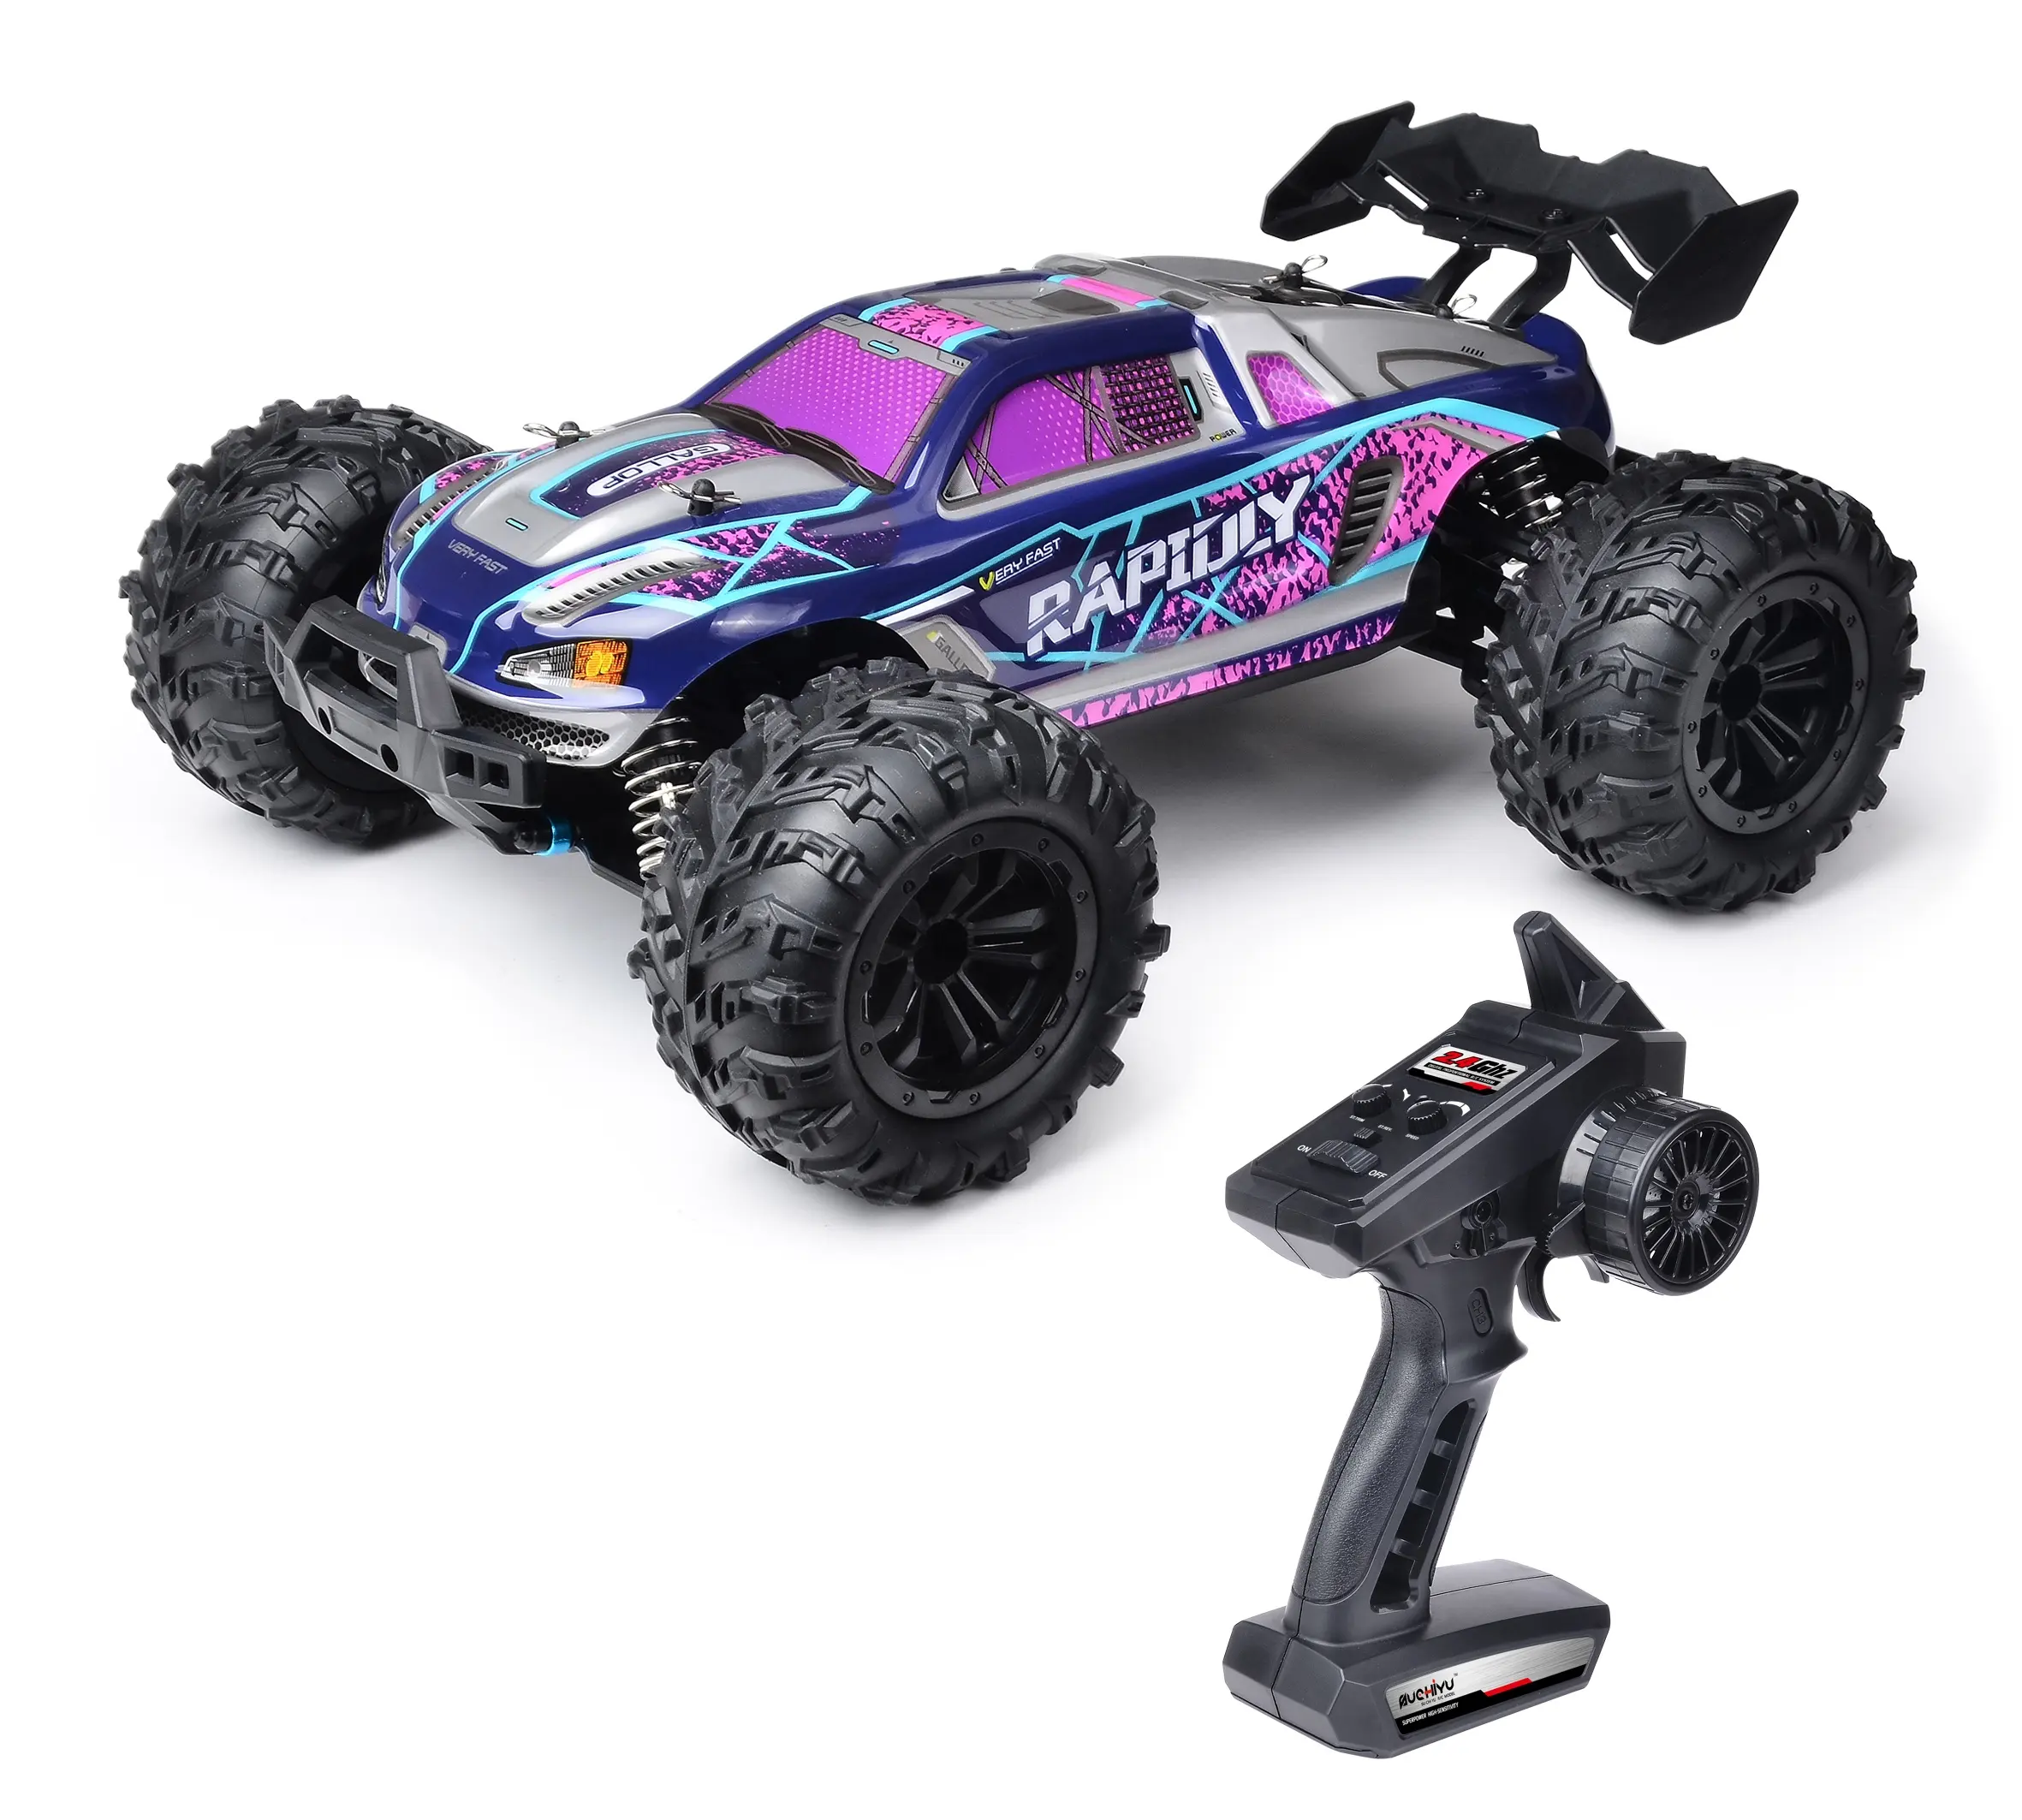 Hot Sale 1:16 Wireless Remote Control Car 2.4GHz Highly Waterproof Off-Road Climbing Vehicle4WD high speed drift car